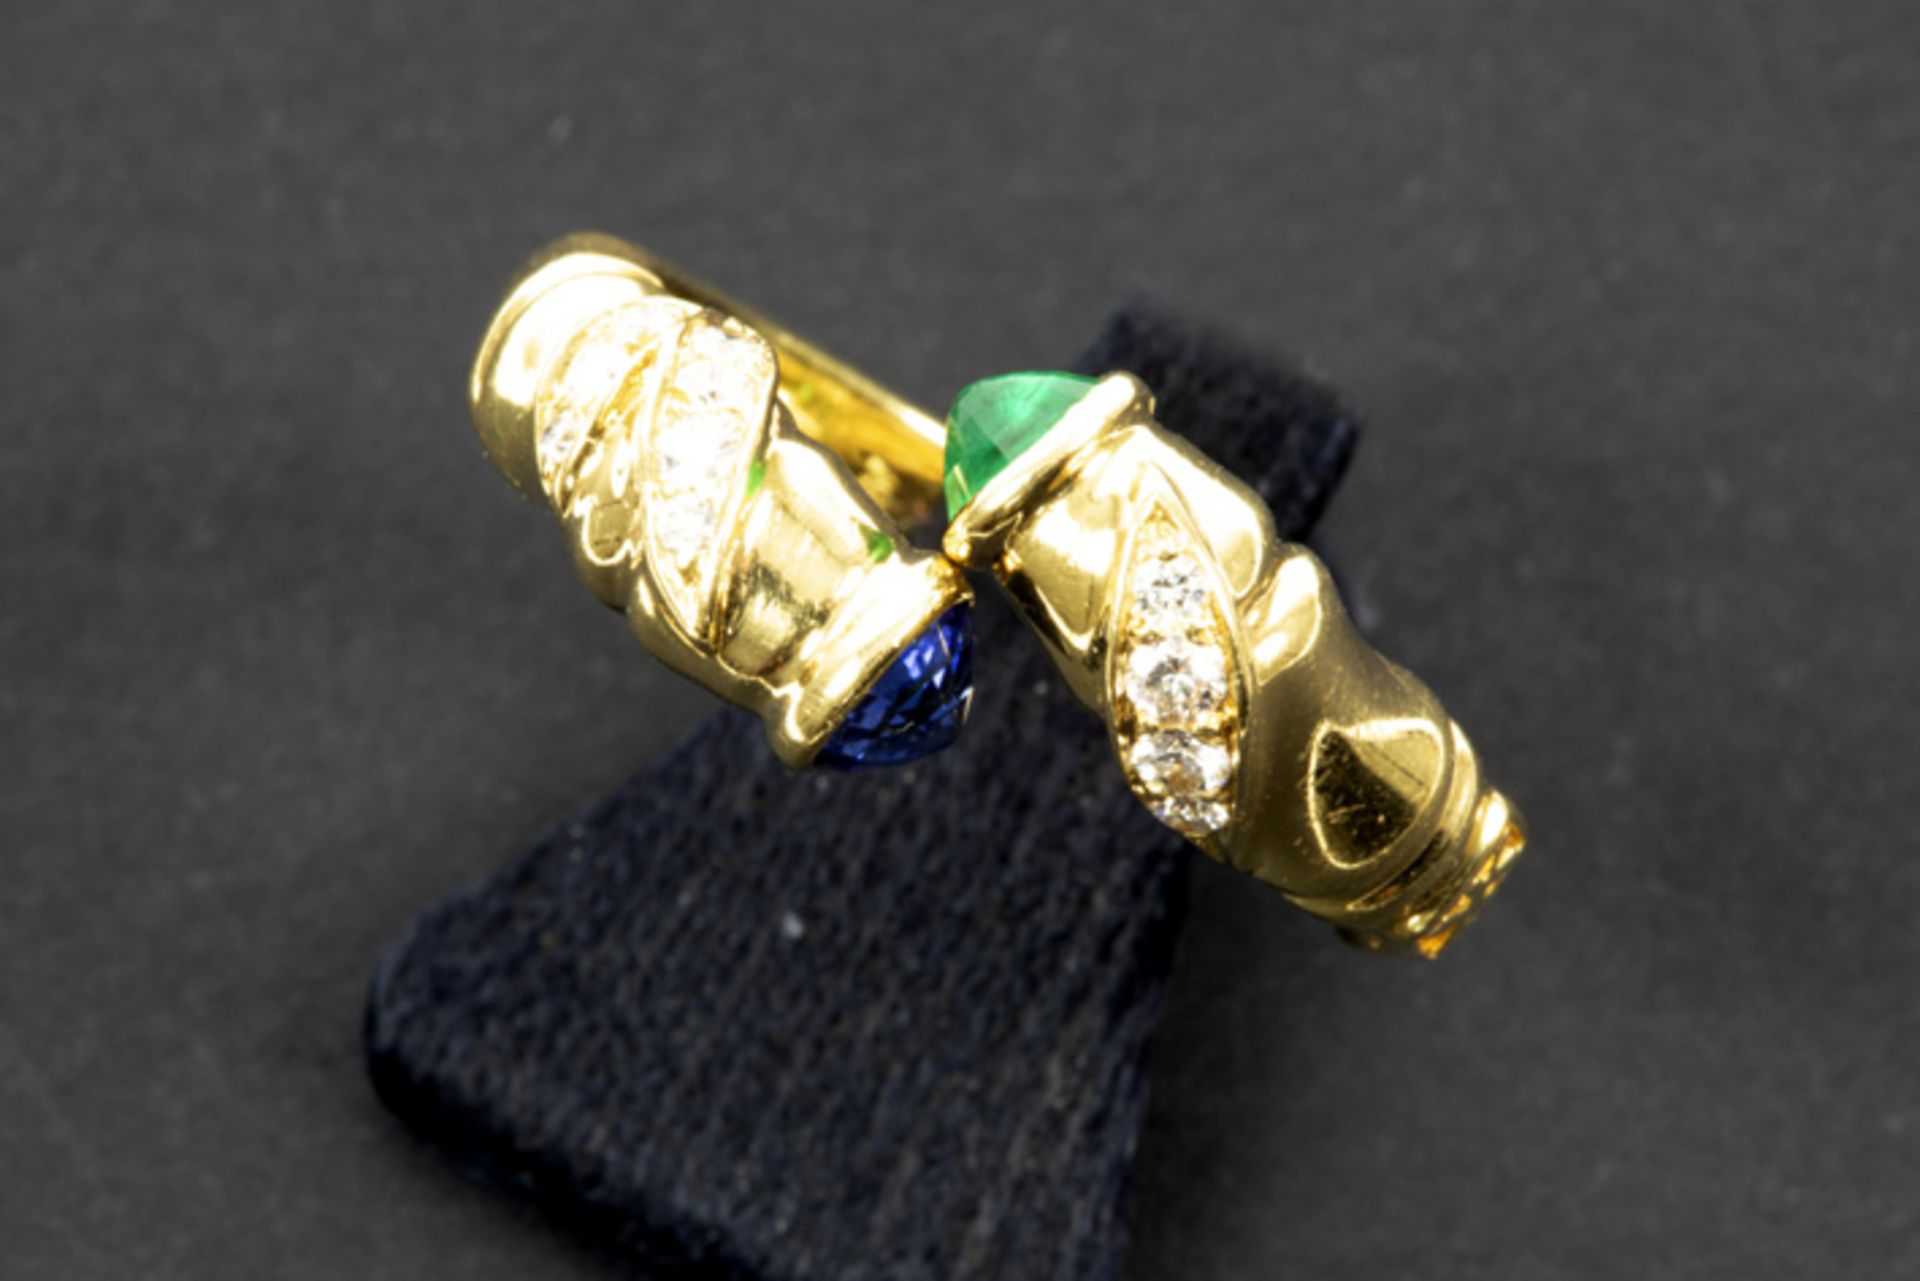 ring with a Cartier like design in yellow gold (18 carat) with a cabochon cut emerald and sapphire